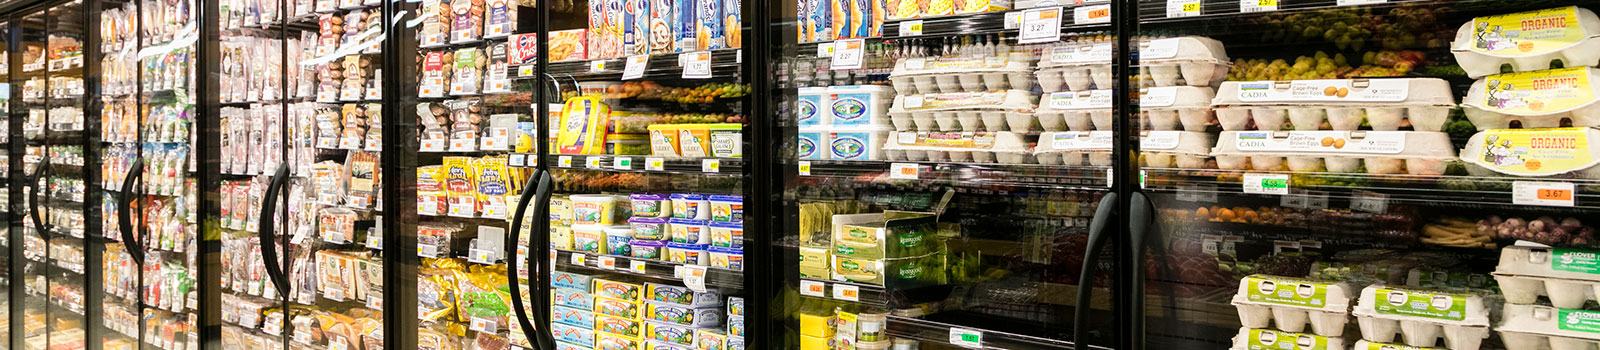 A well-designed and maintained supermarket cooler installed by Pierce Refrigeration will run efficiently and could help reduce operating costs.